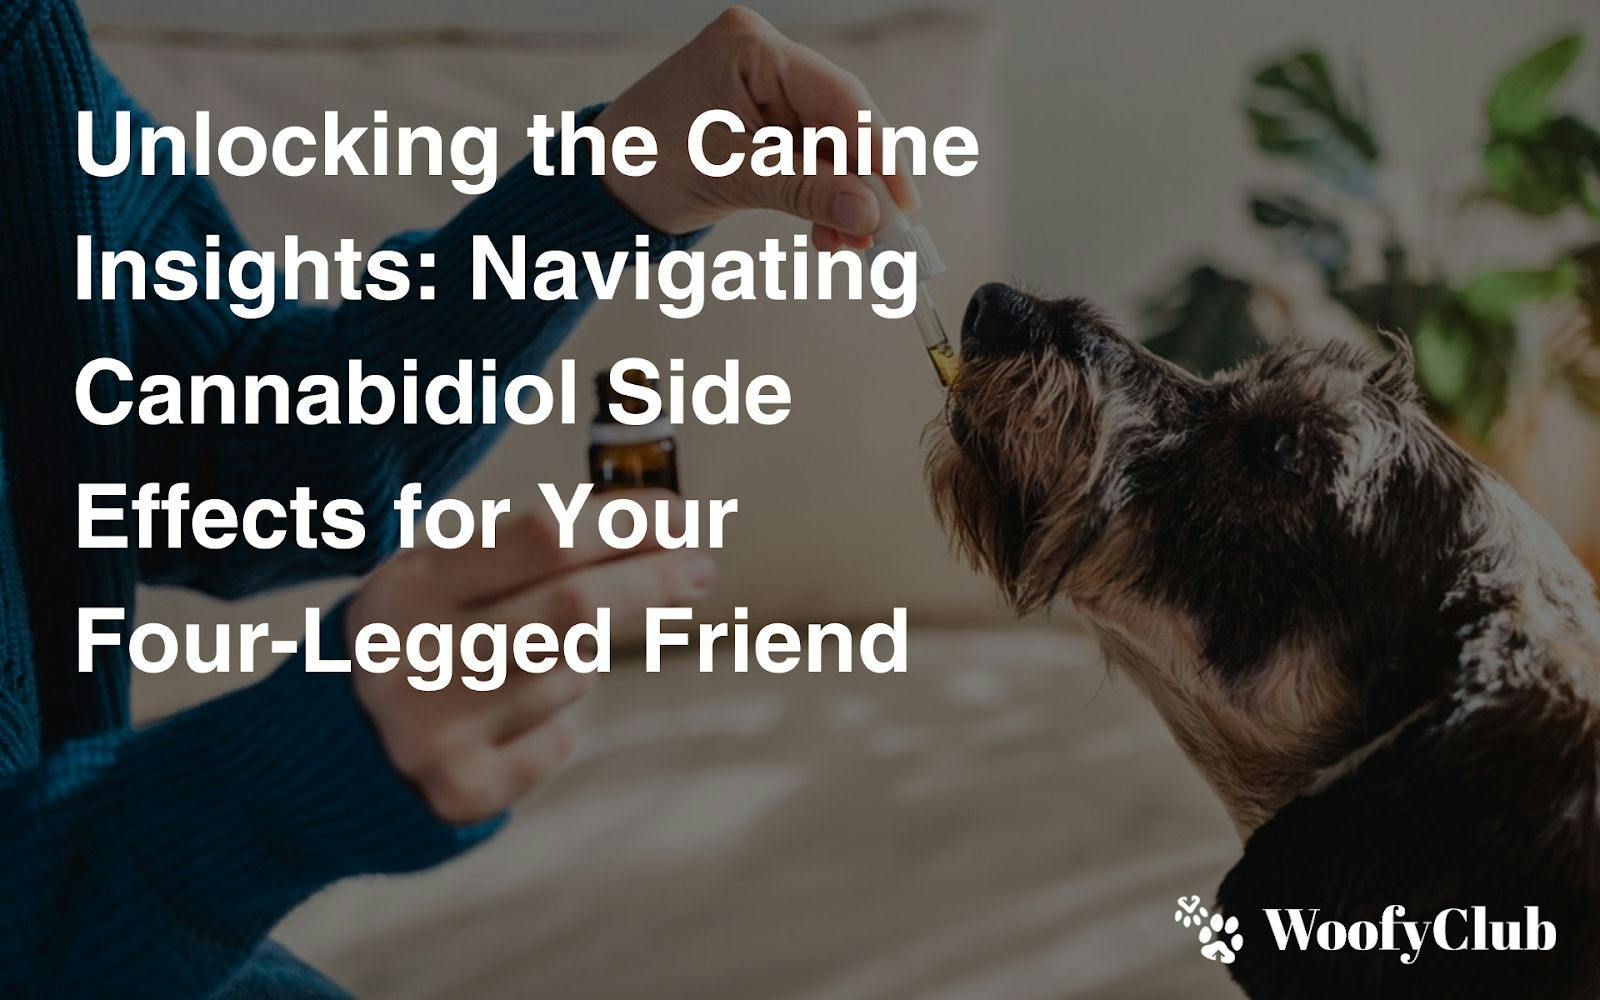 Unlocking The Canine Insights: Navigating Cannabidiol Side Effects For Your Four-Legged Friend